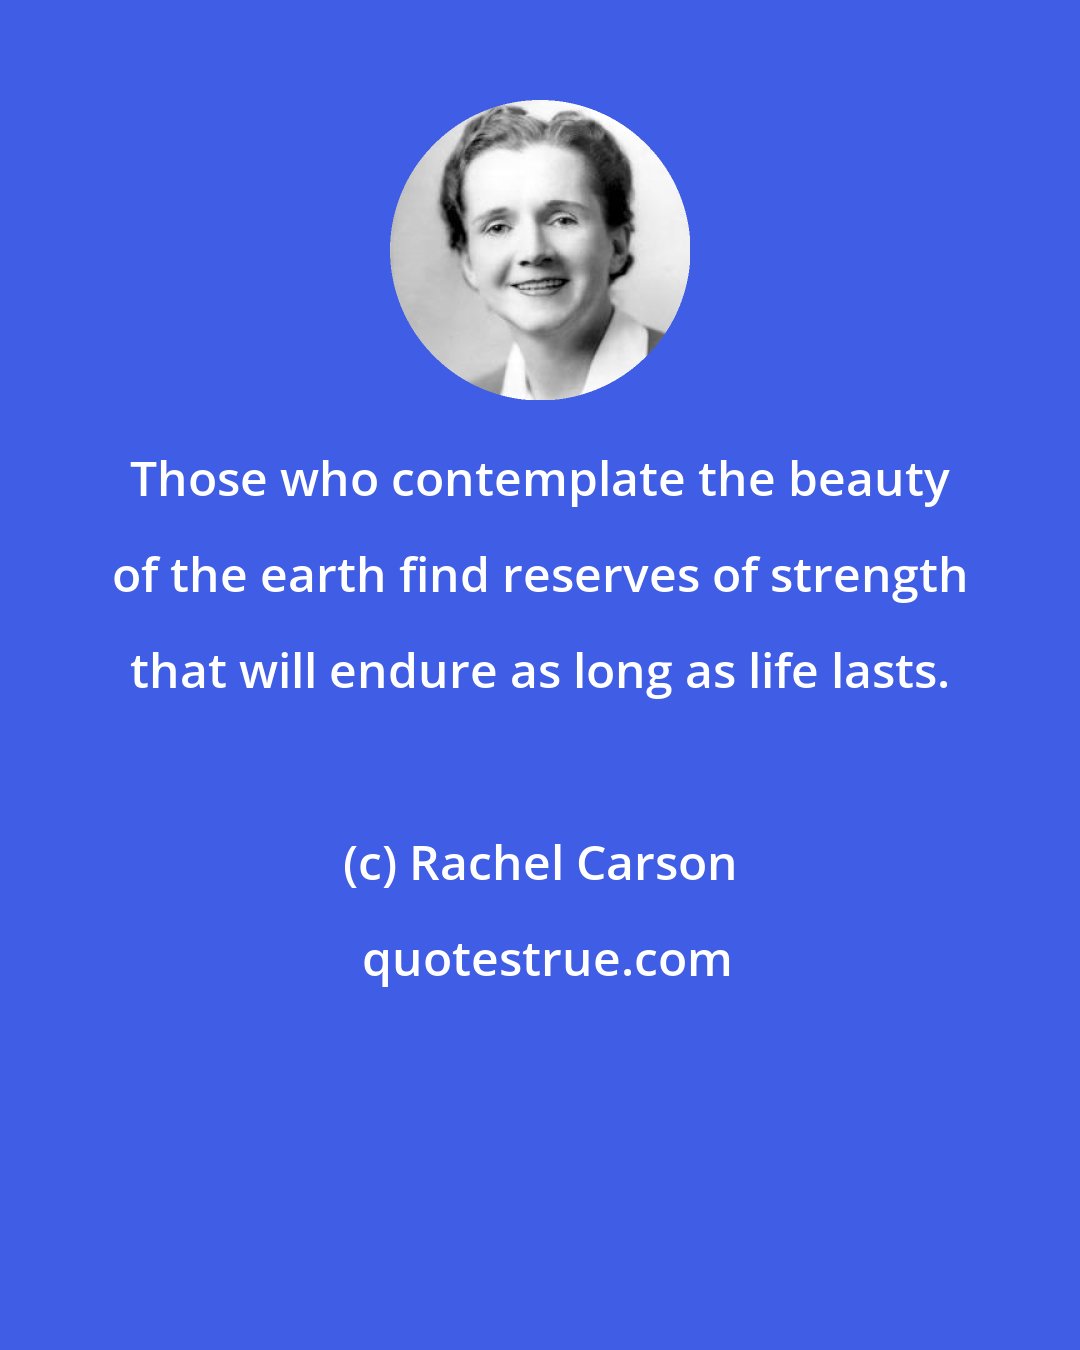 Rachel Carson: Those who contemplate the beauty of the earth find reserves of strength that will endure as long as life lasts.